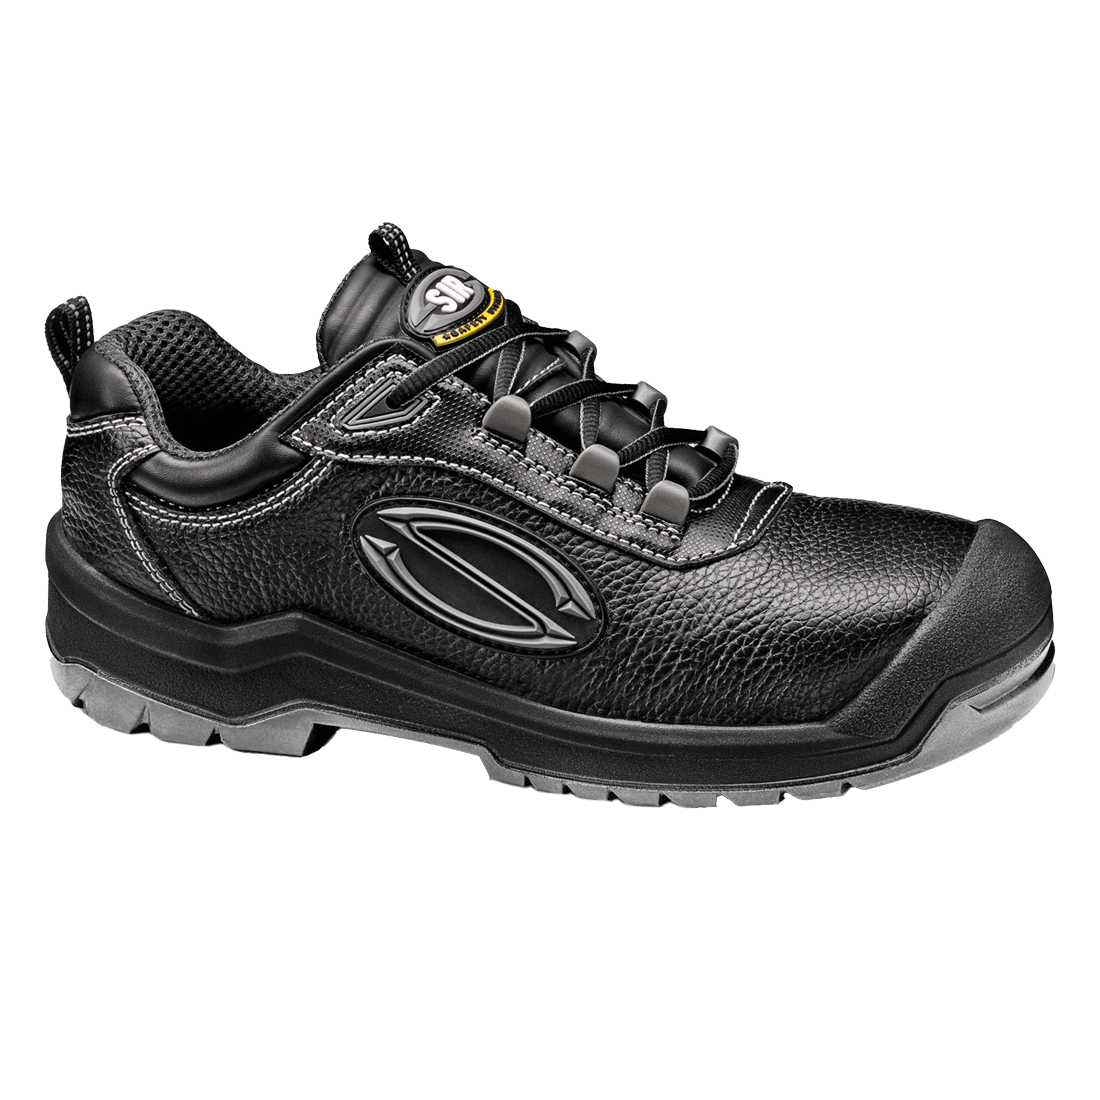 FOBIA Sir BLACK LOW System | Safety SHOE